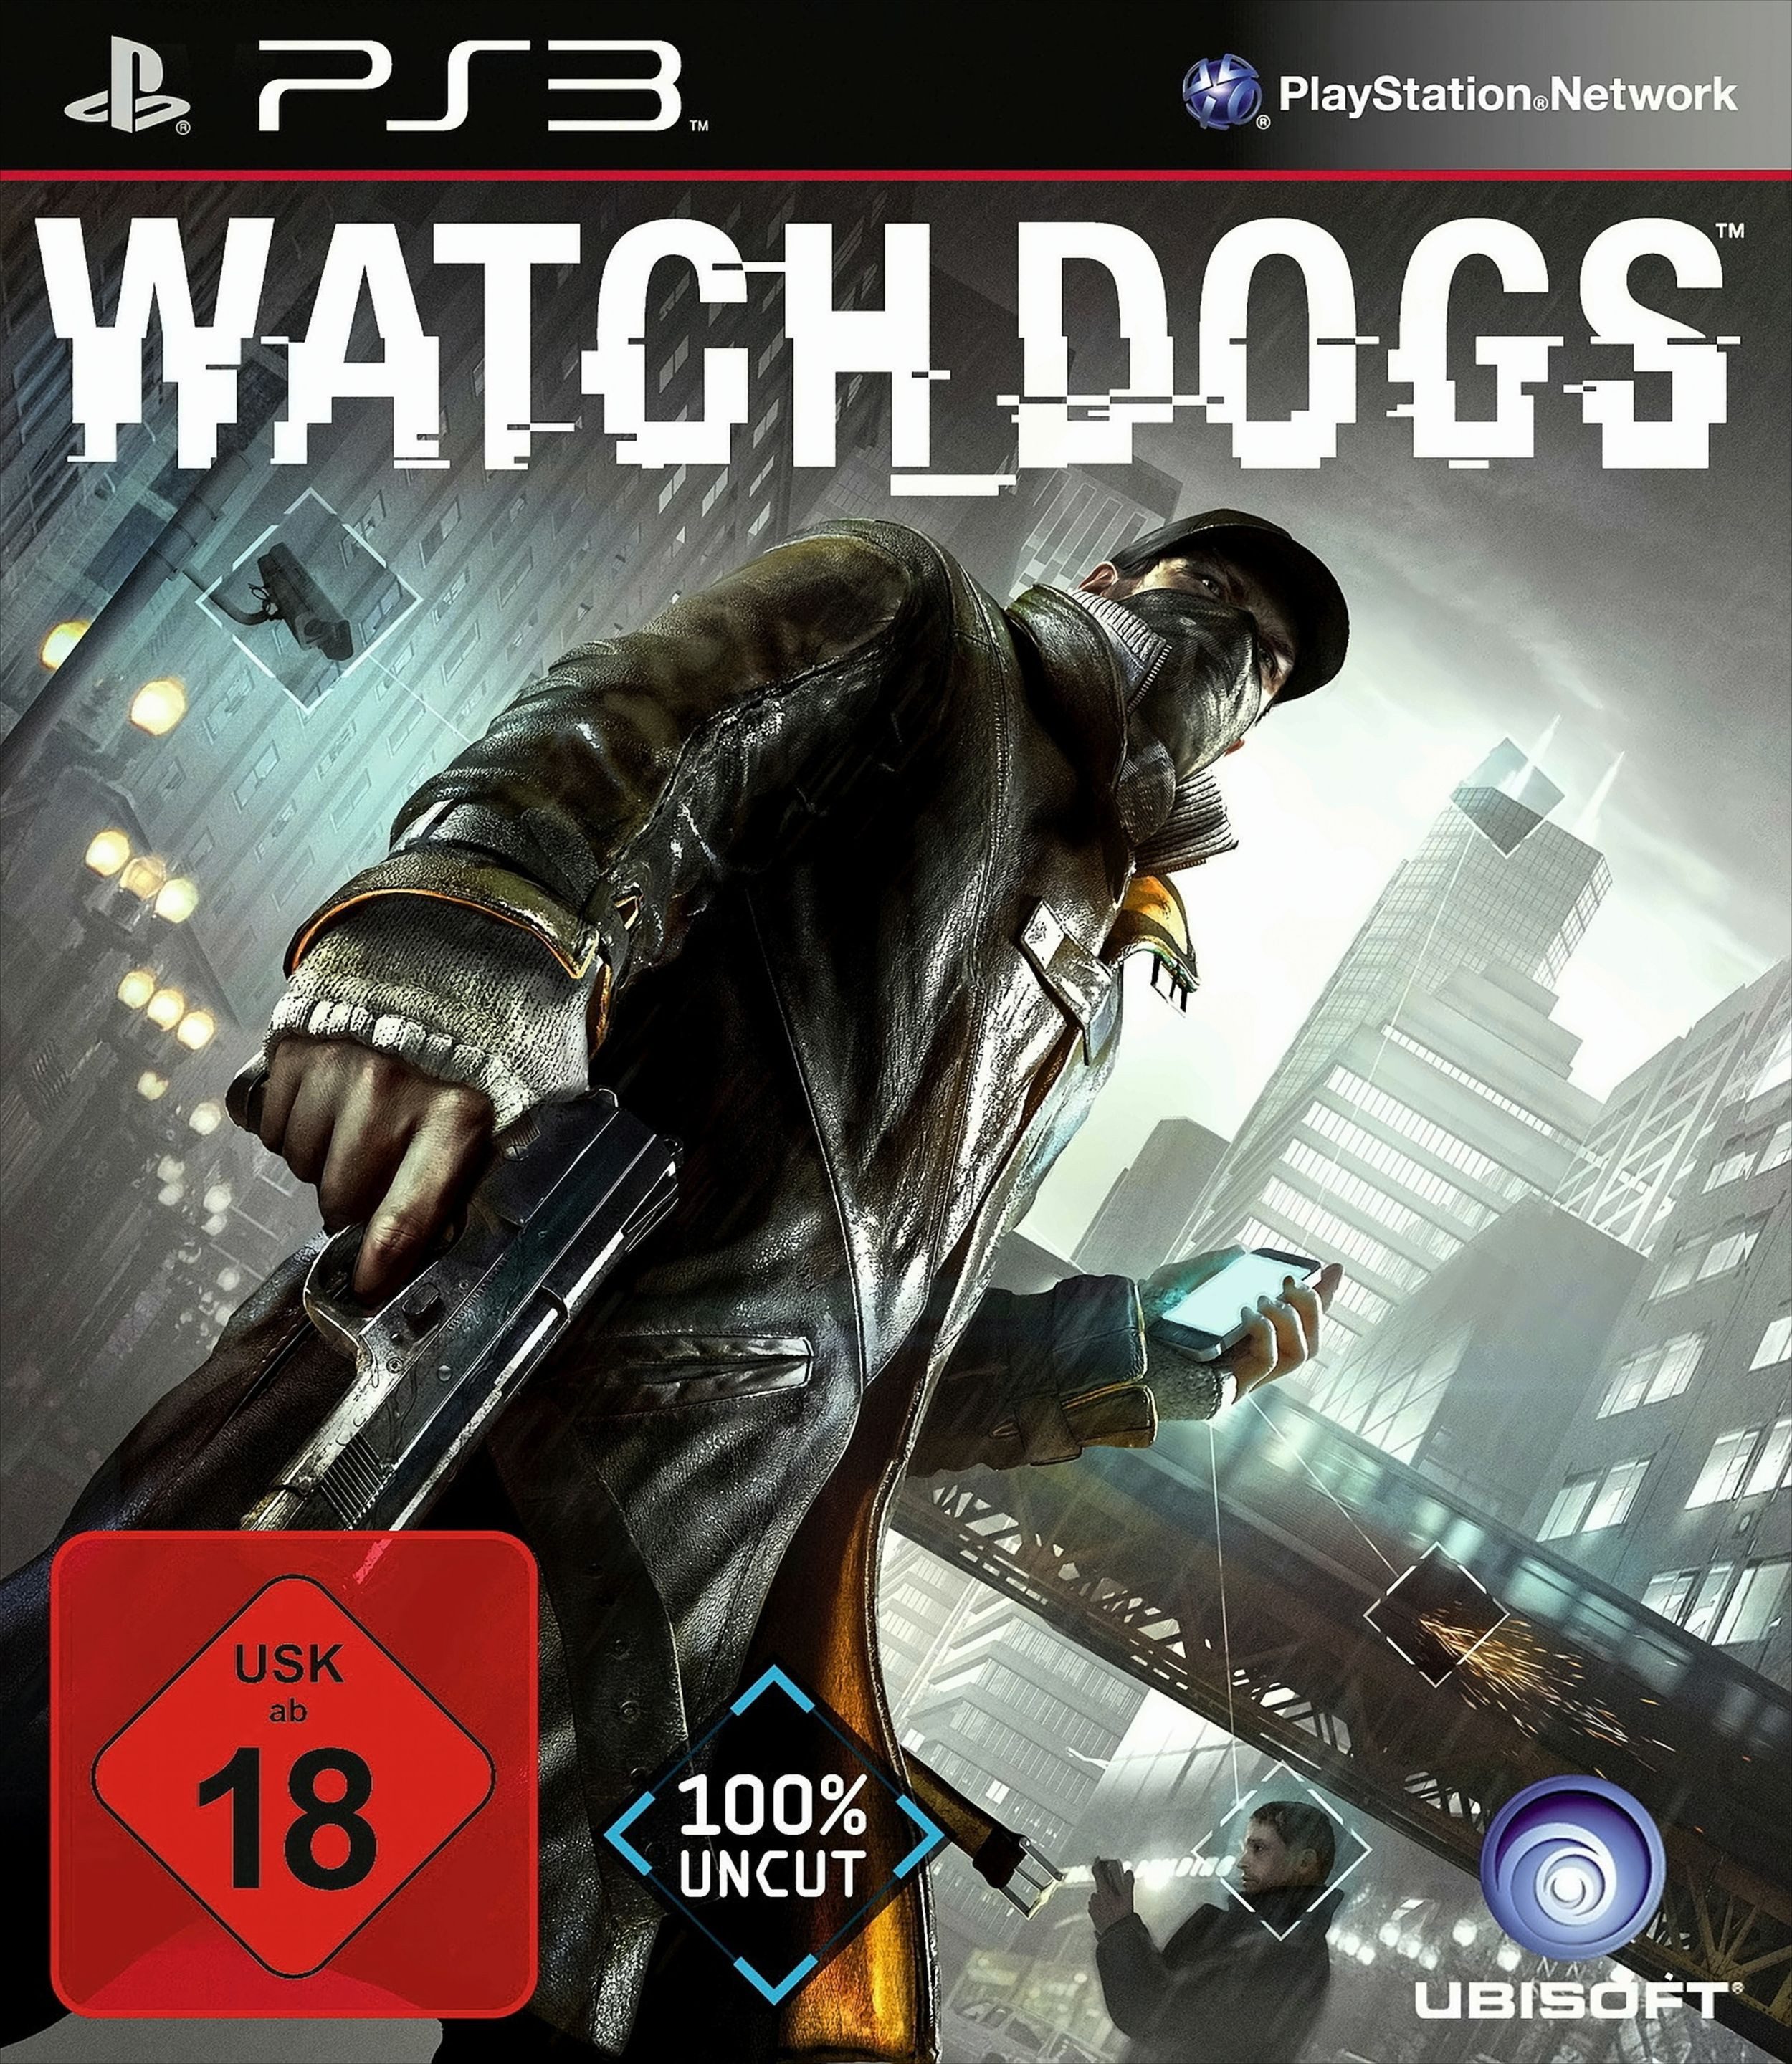 Watch Dogs Playstation 3